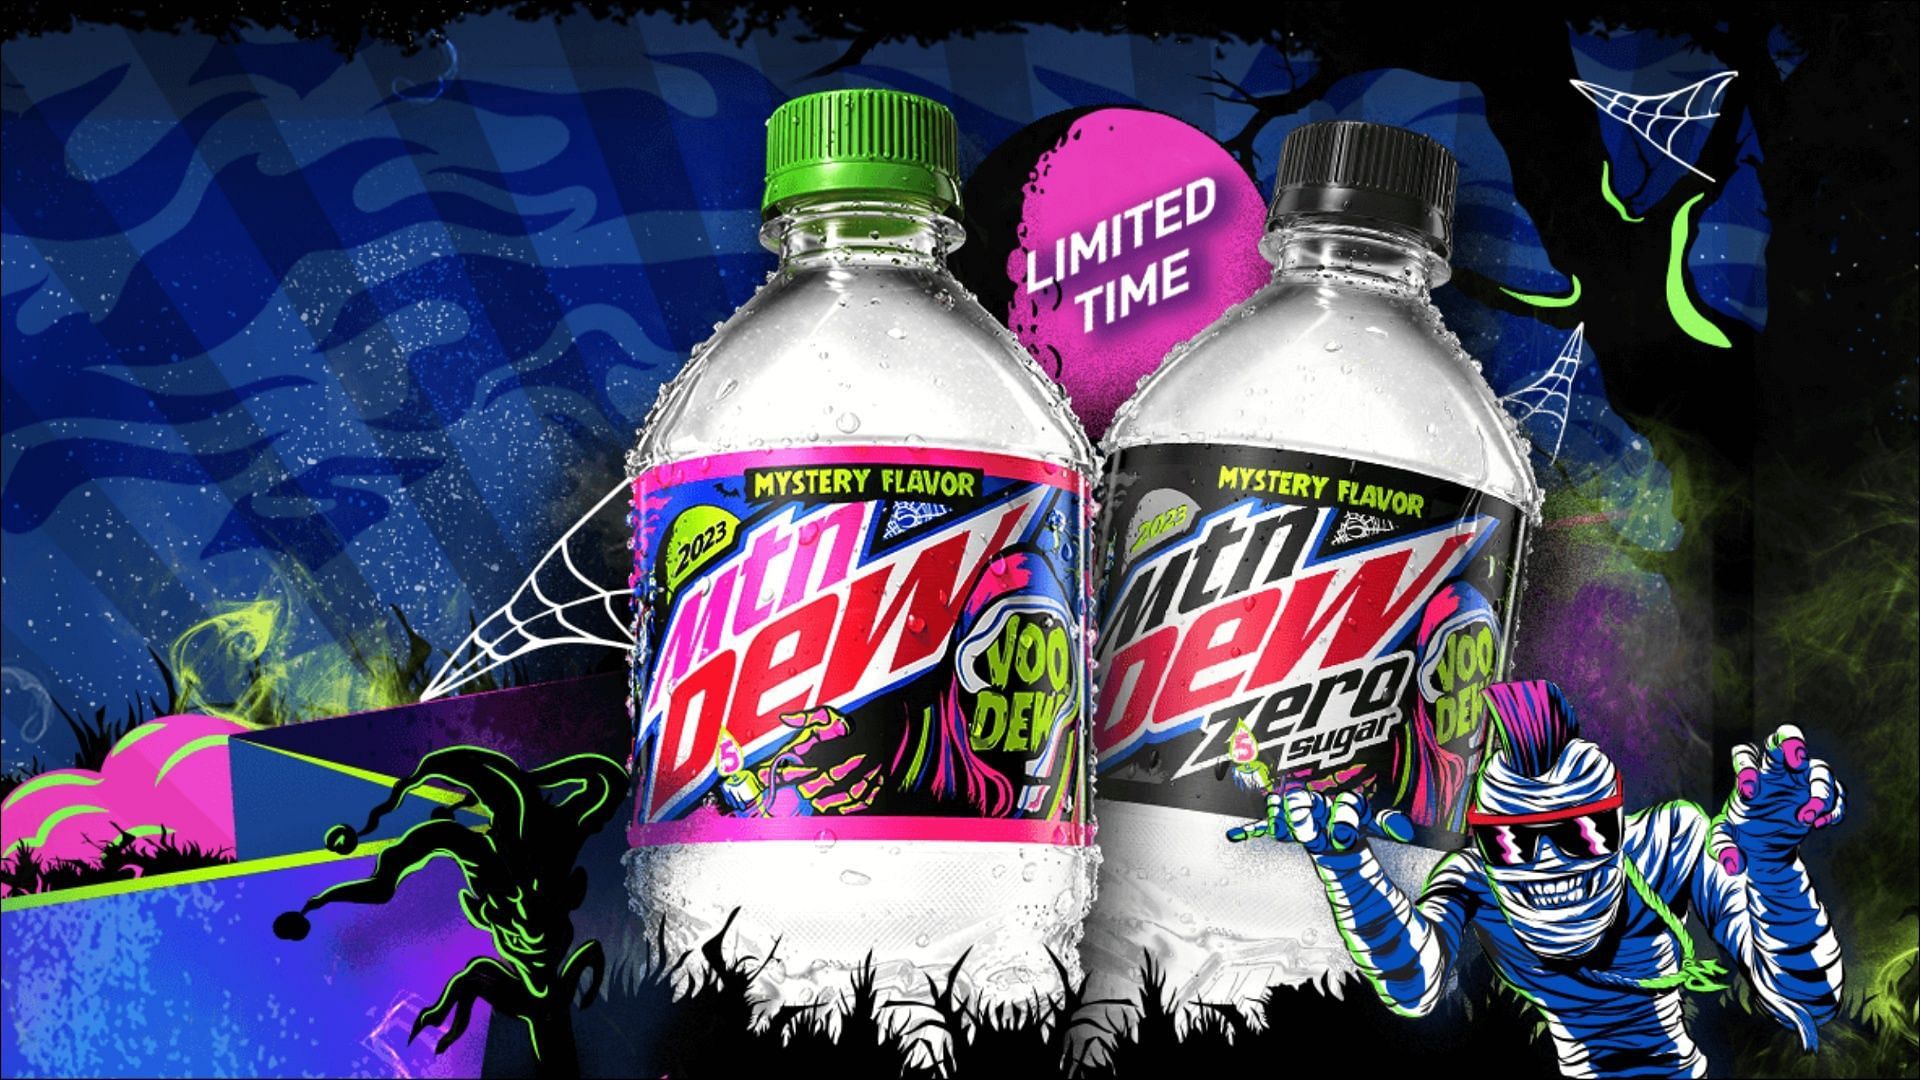 MTN Dew VOO-DEW will be hitting stores across the U.S. on September 12 (Image via Mountain Dew)